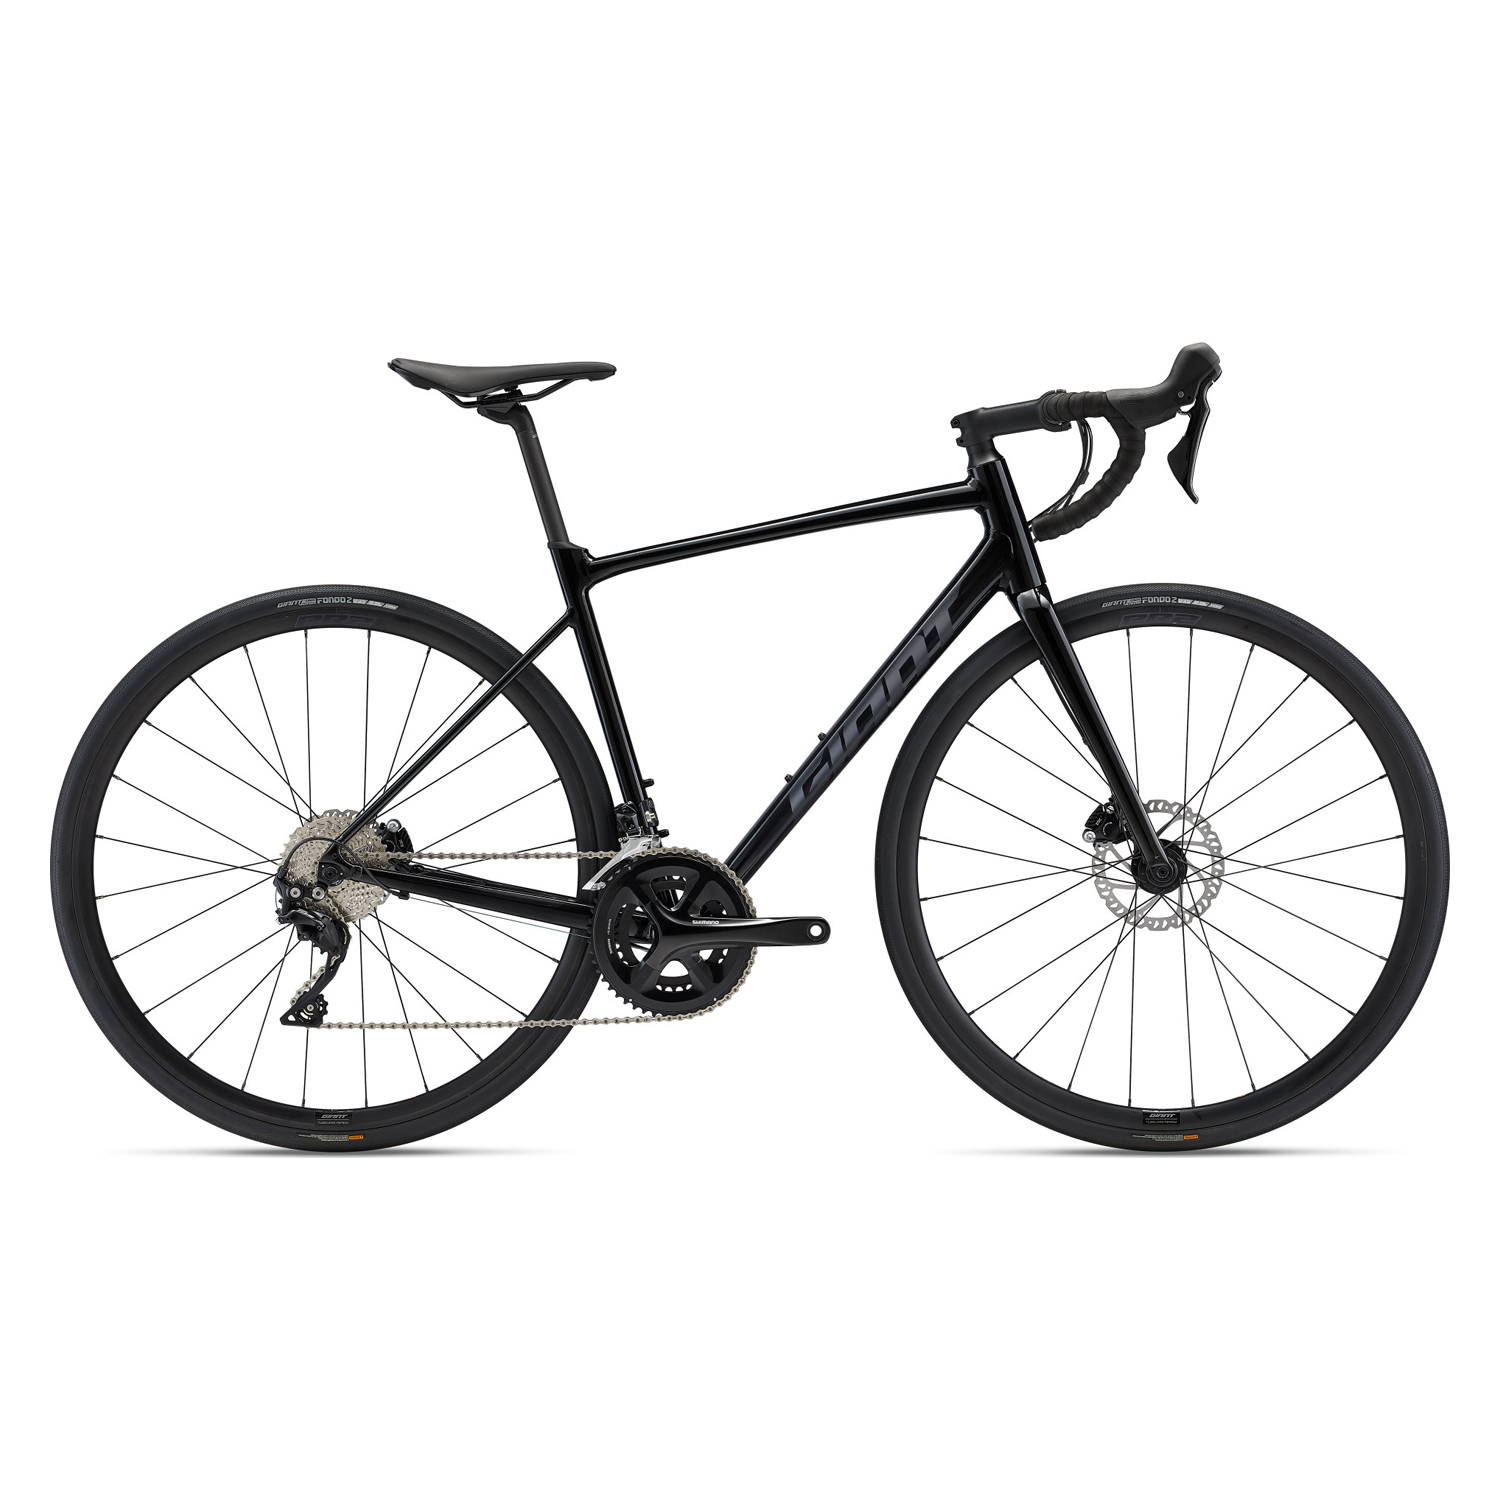 Giant Contend SL 1 Disc